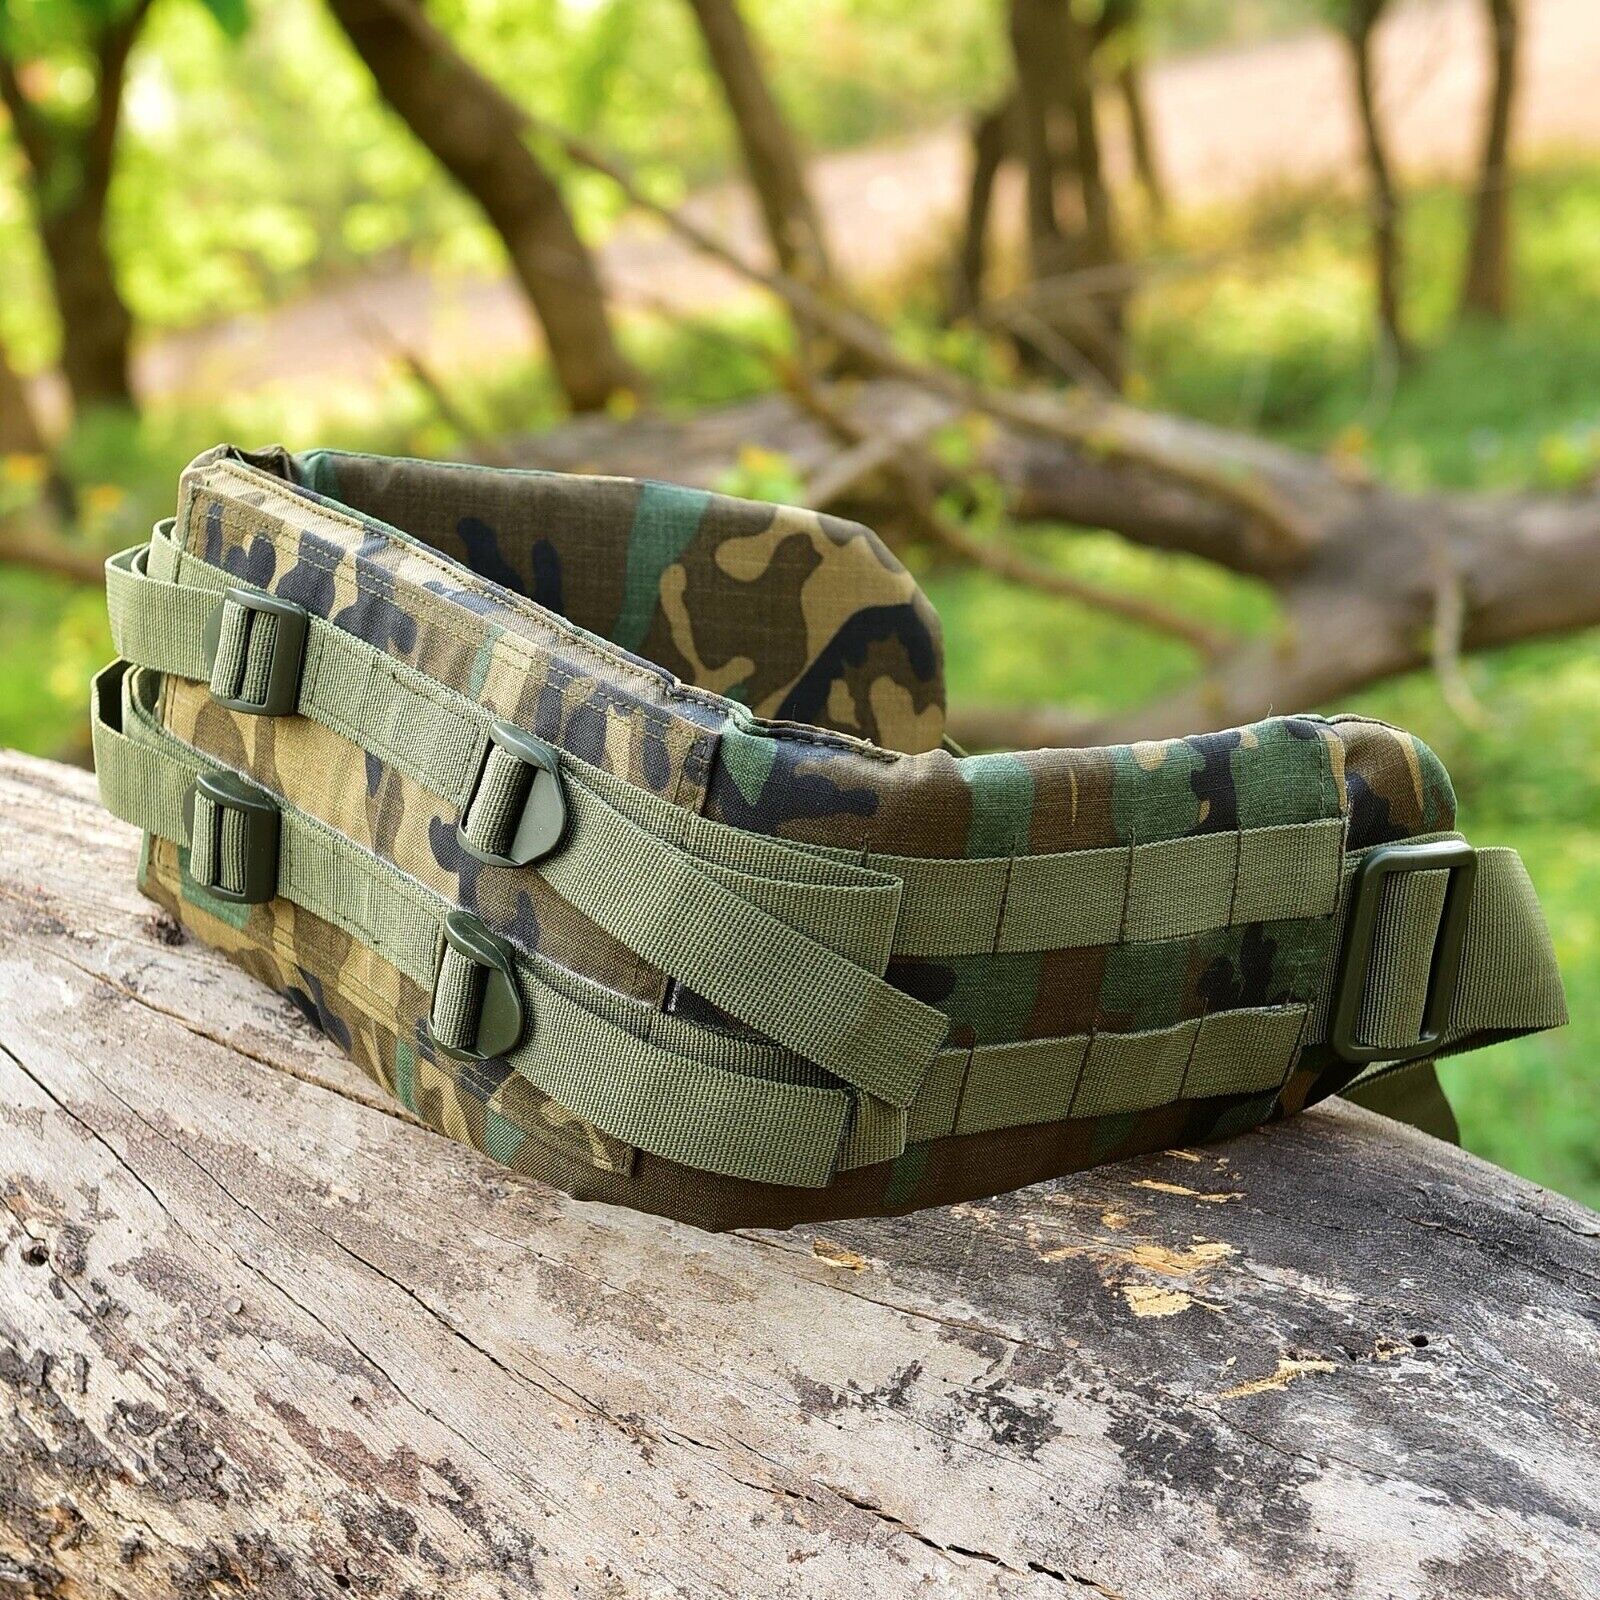 Military Alice Pack ,Kidney Pad & Waist Belt Hunting Camping Hiking Outdoor Camo